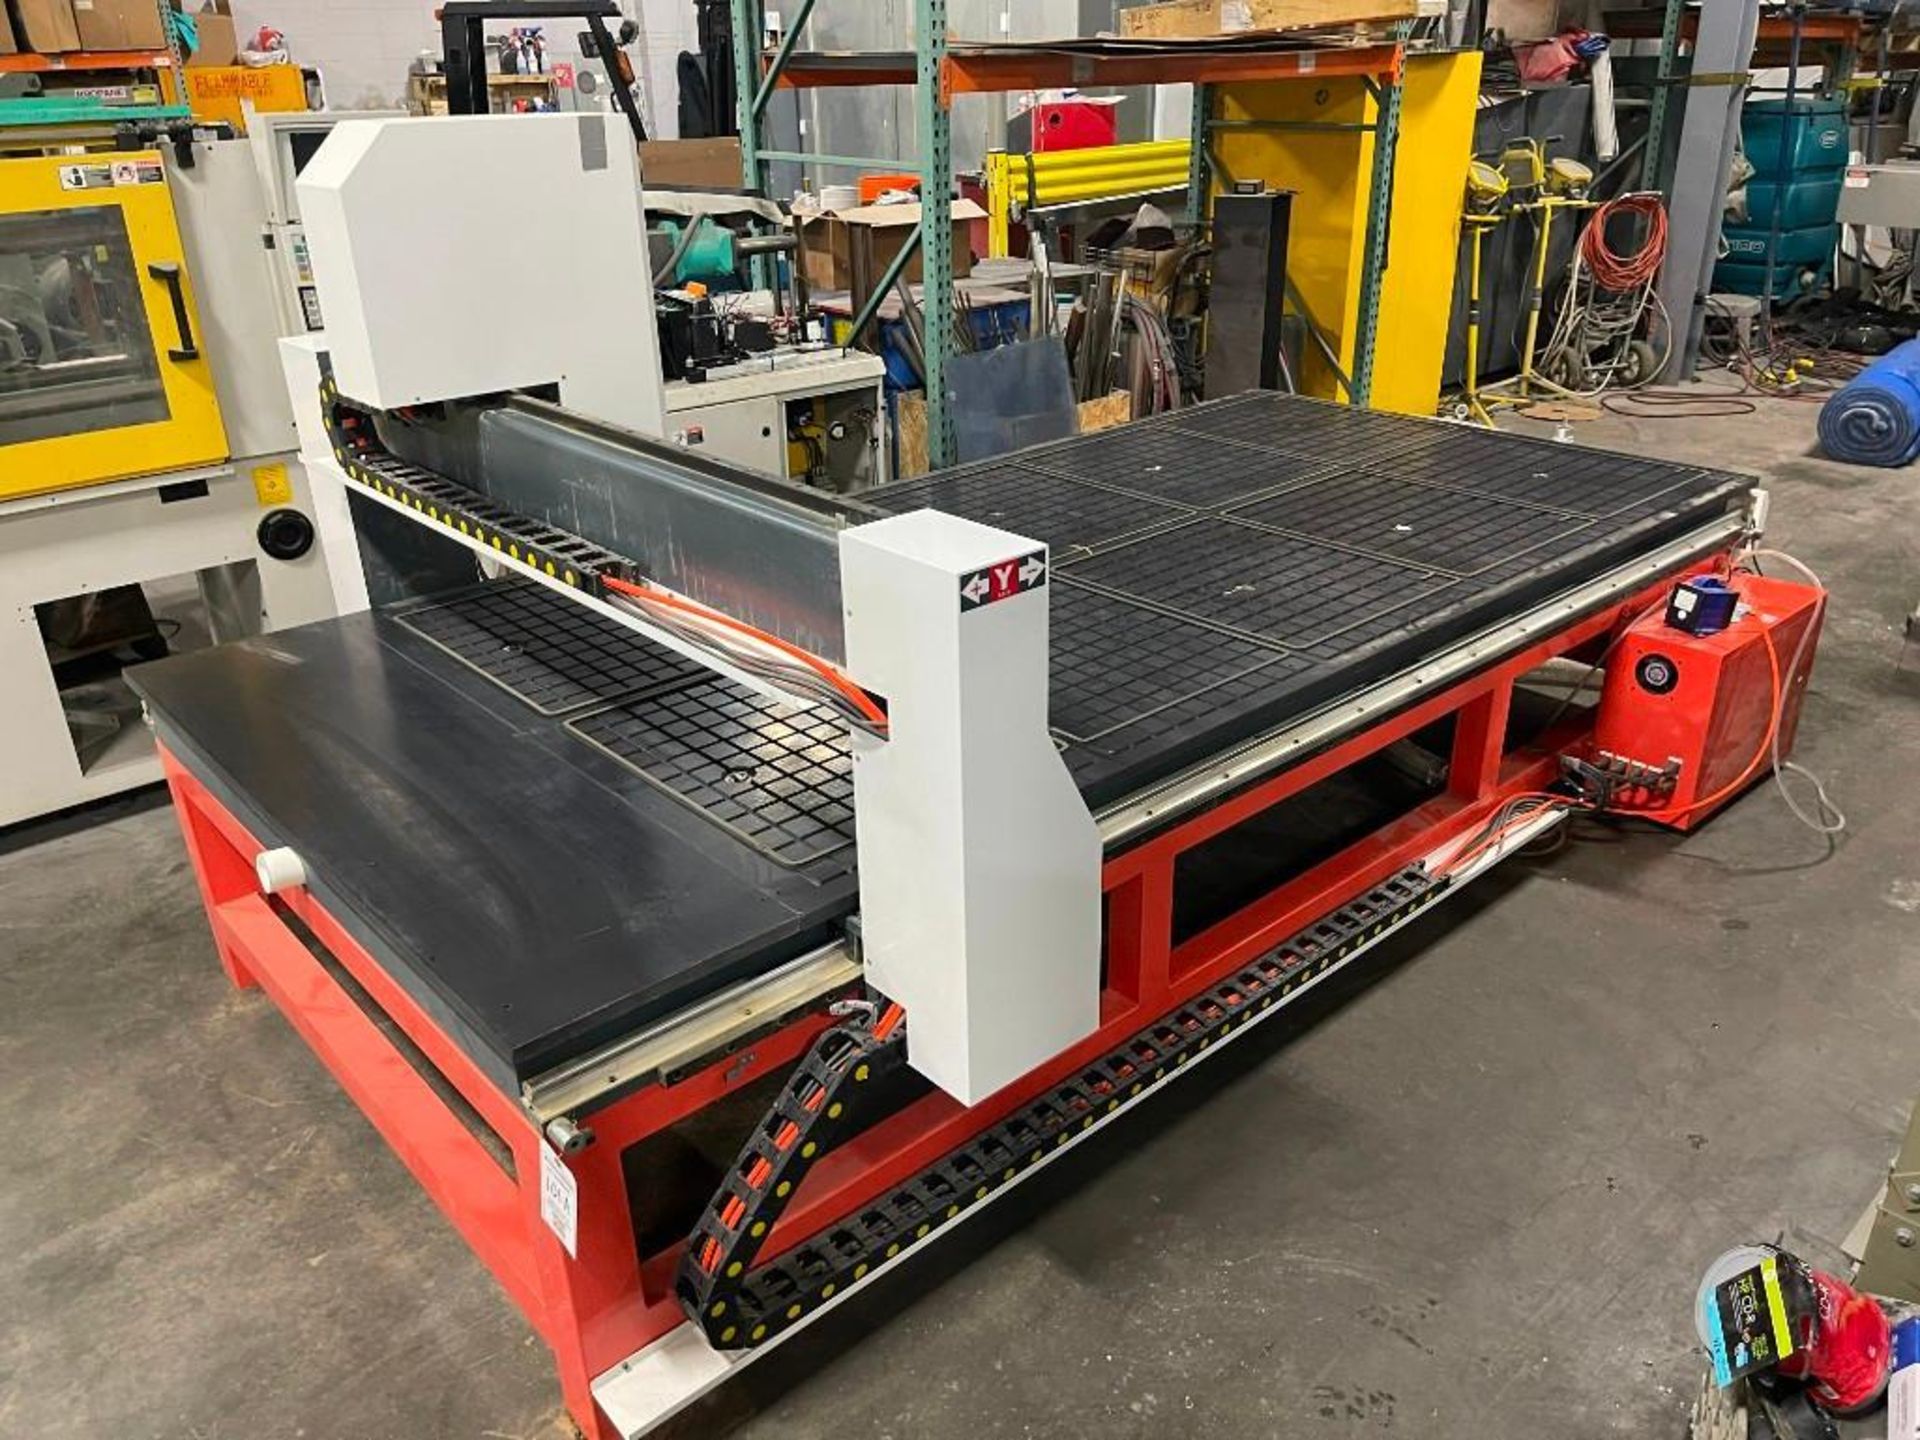 5'X10' Industrial CNC Router